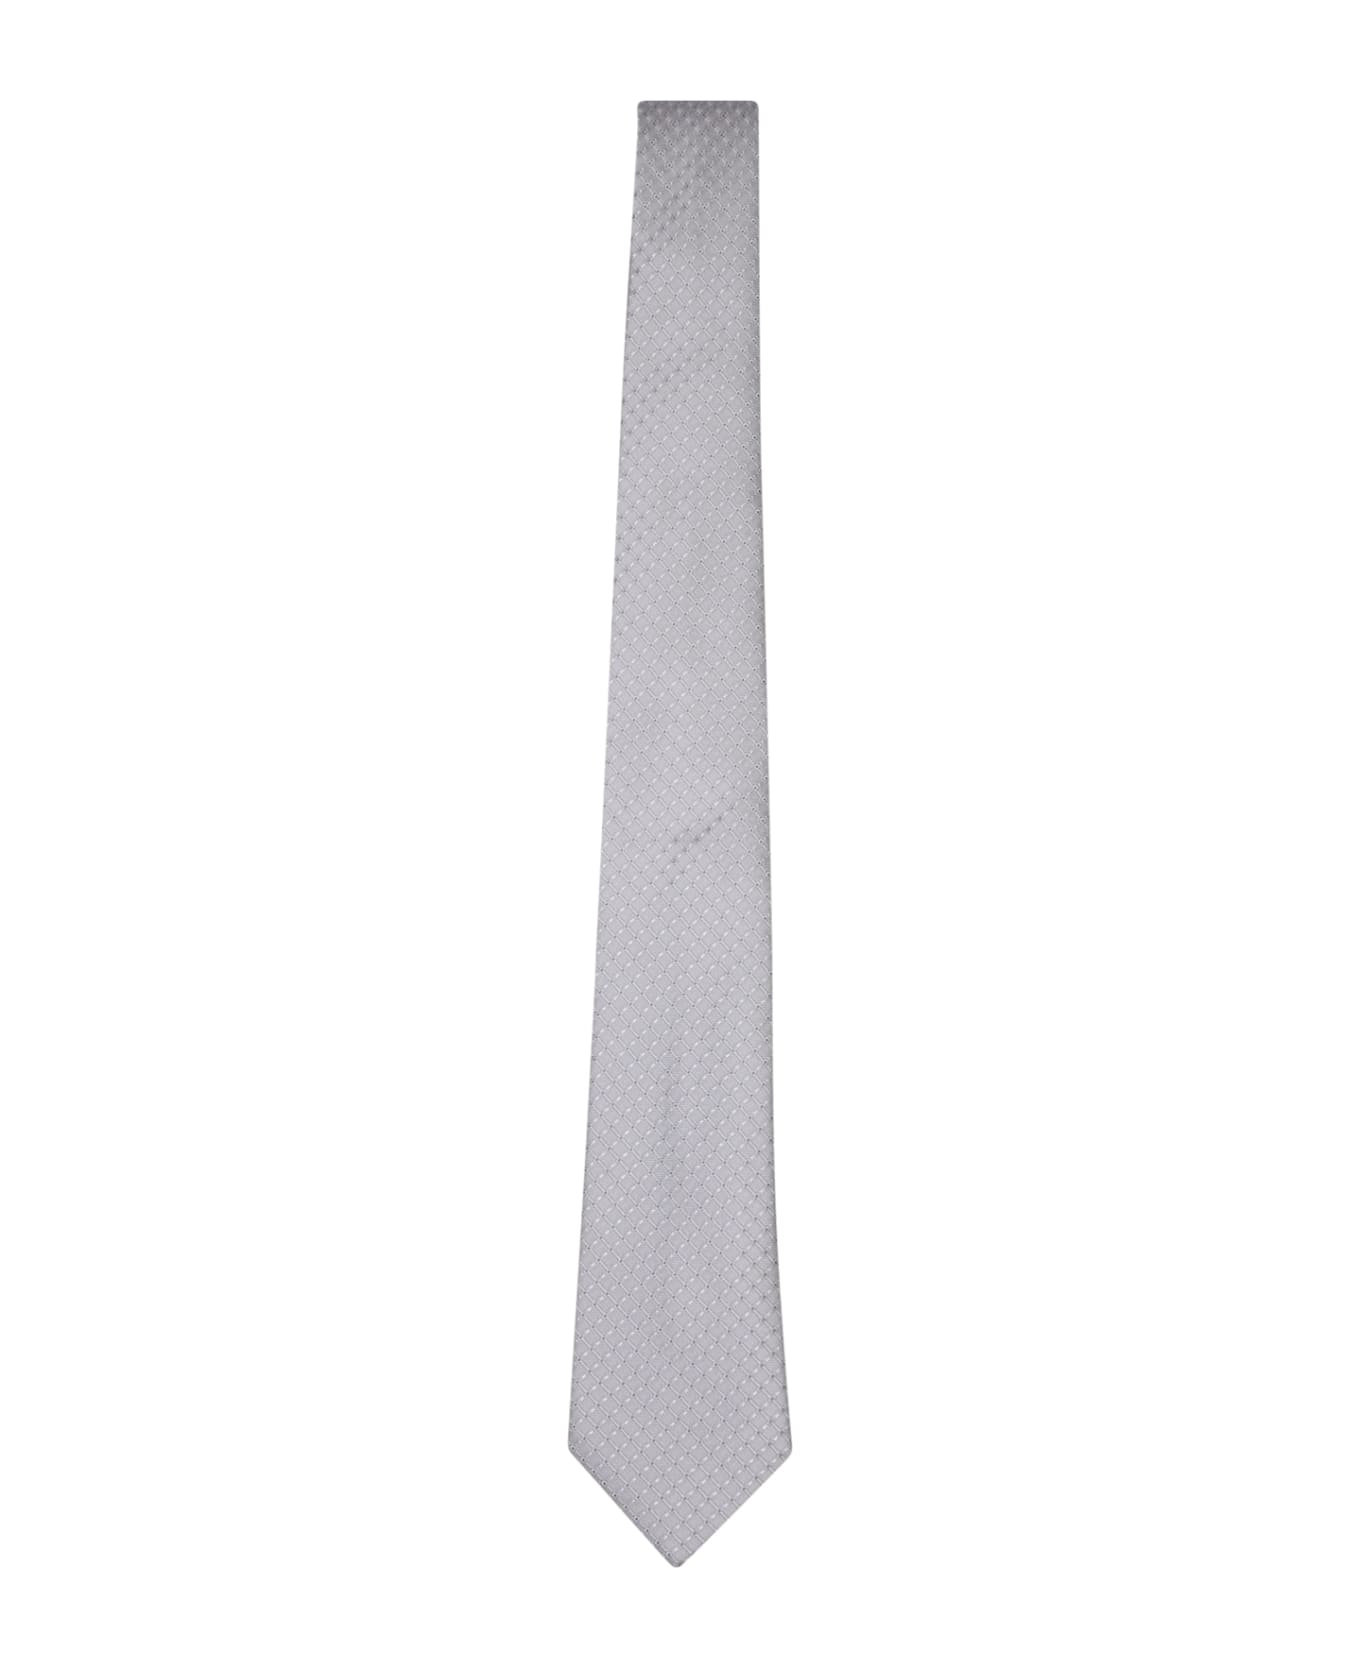 Canali Micropattern Rhombuses Grey Tie - White ネクタイ